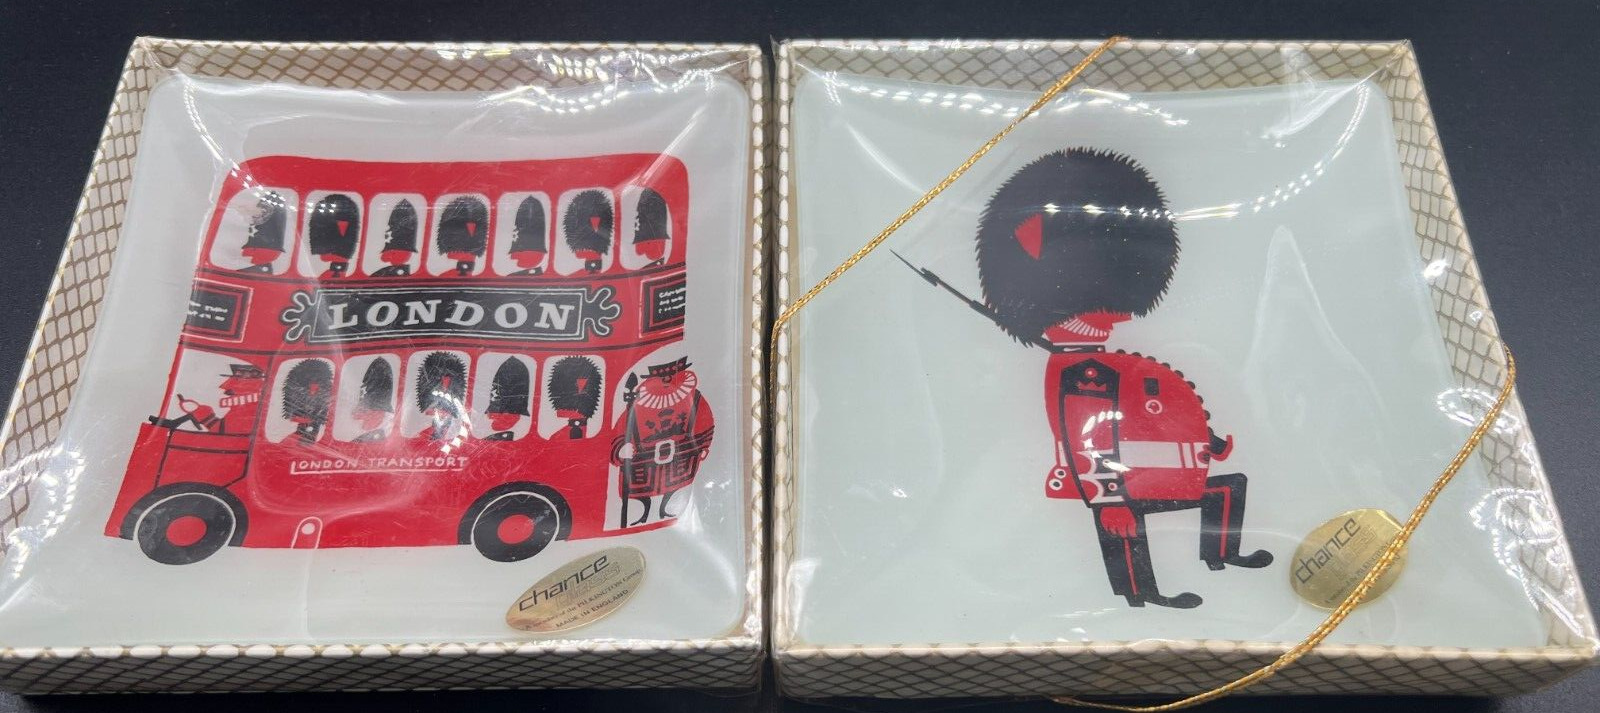 VINTAGE Chance Brothers Glass London Beefeater and Double Decker Bus with Guards